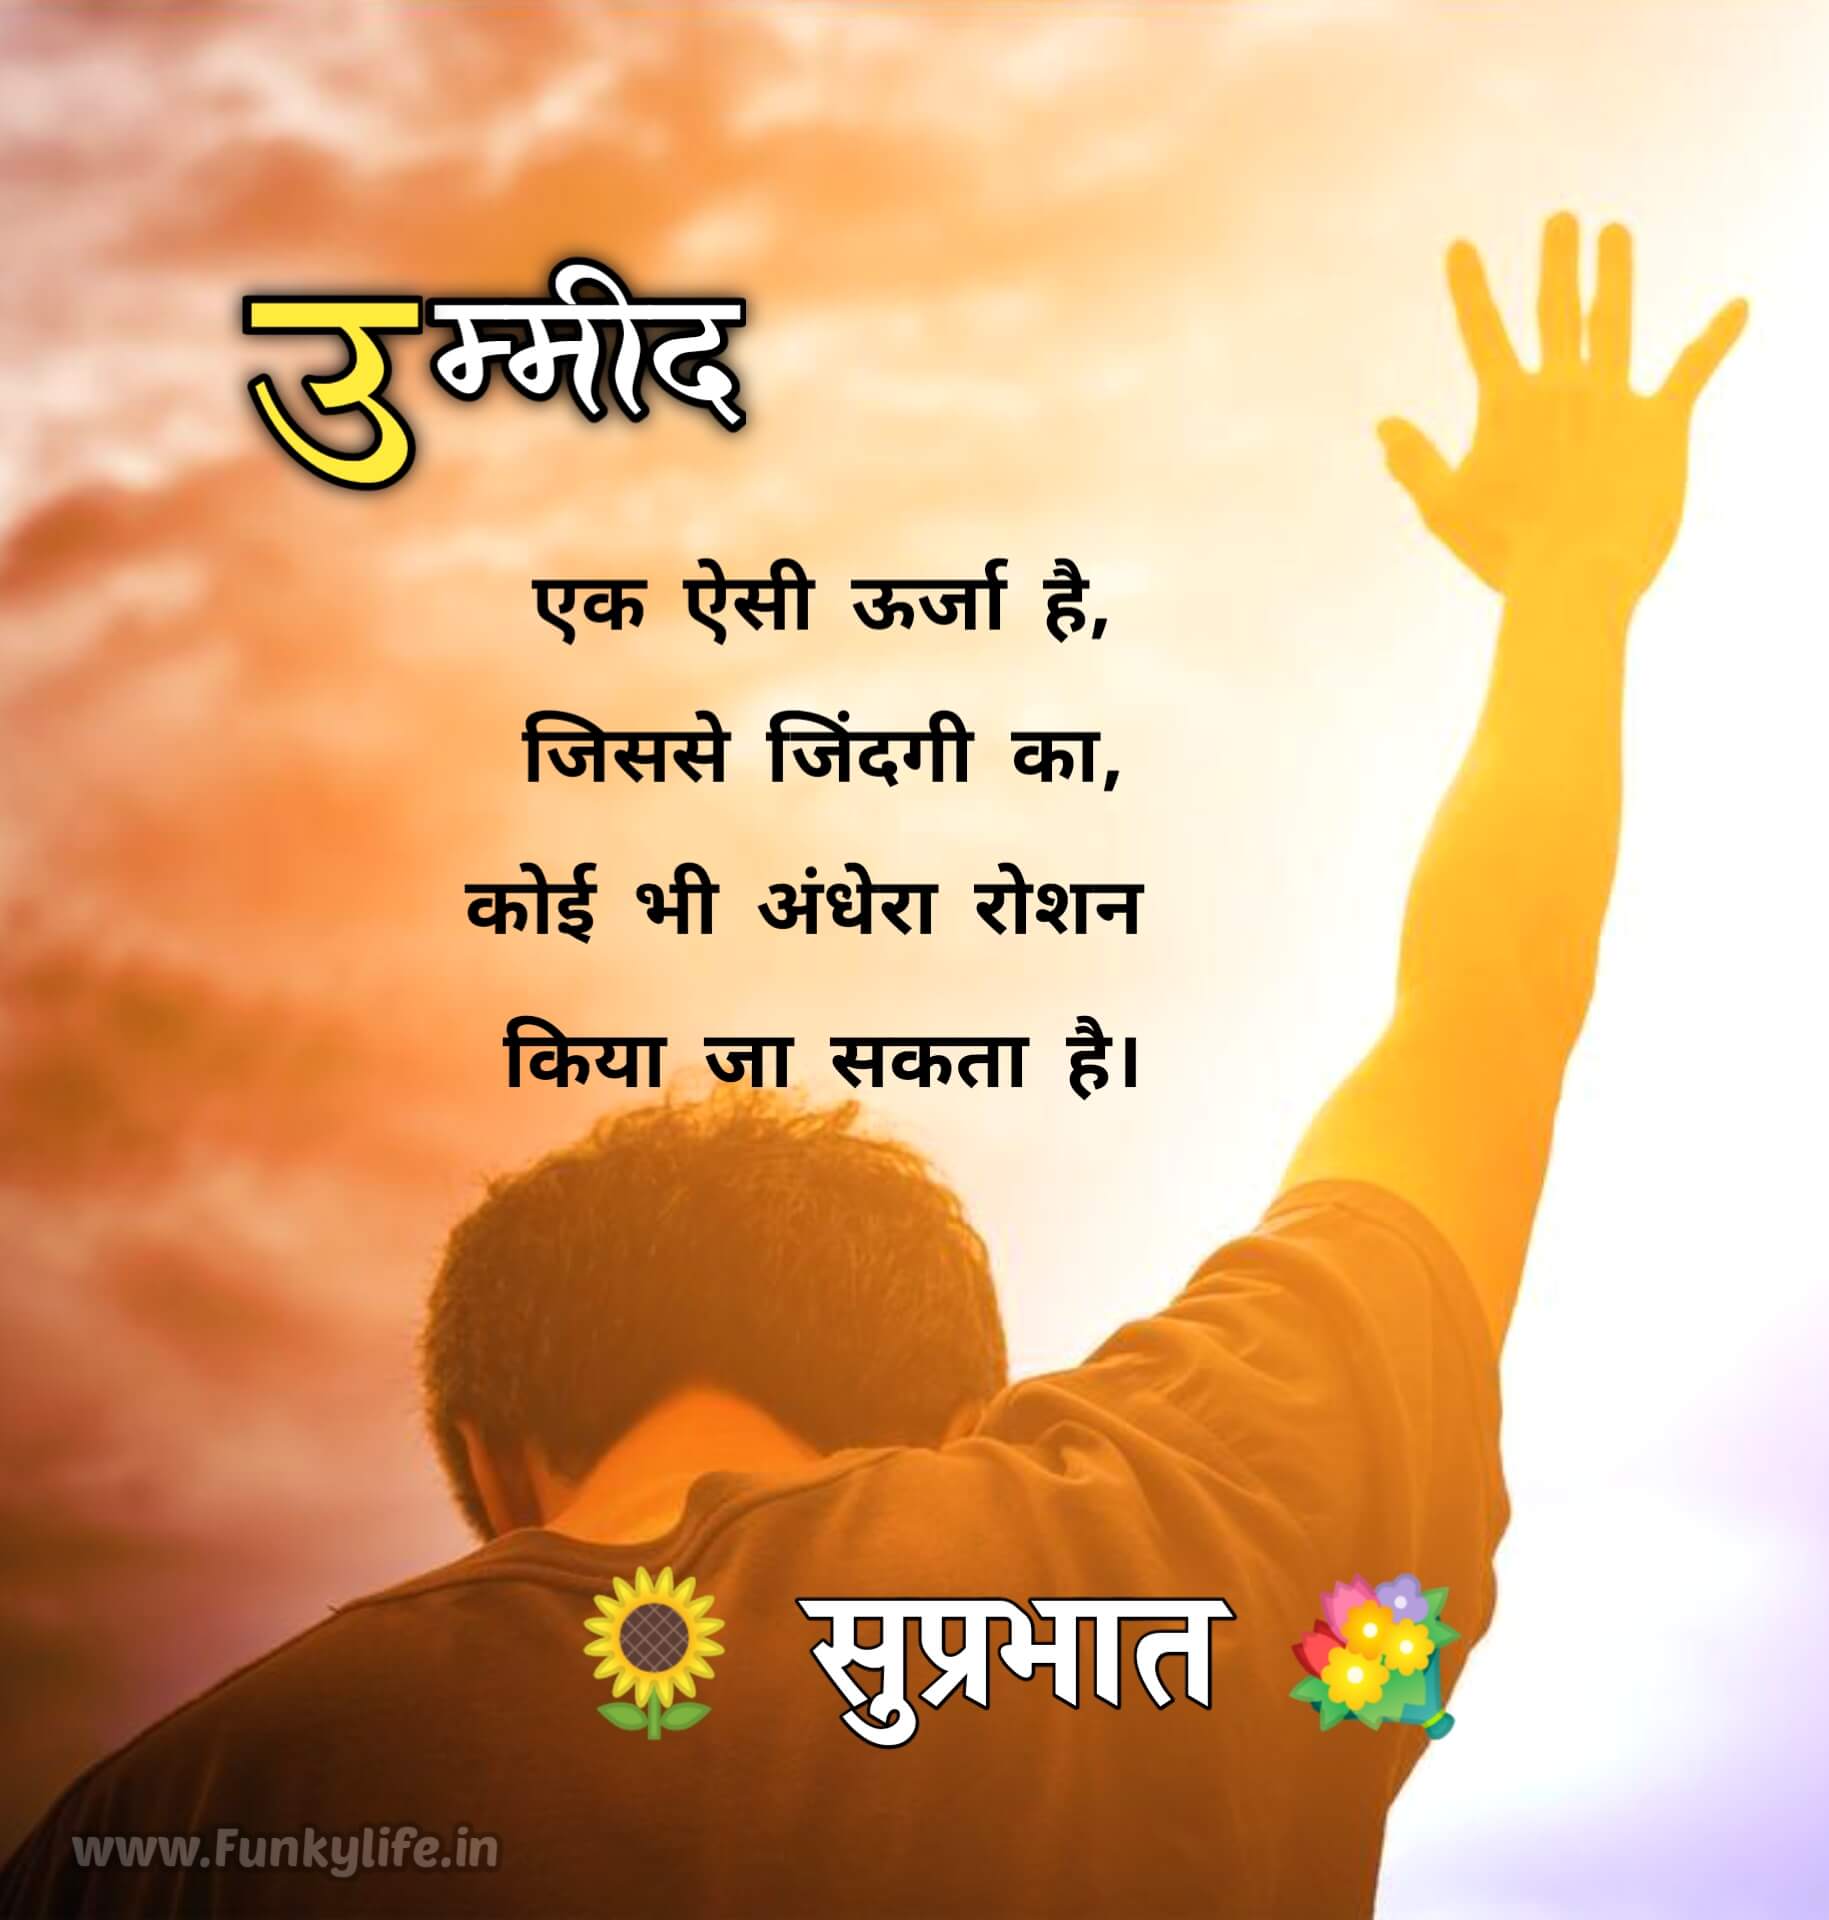 Inspirational Good Morning Thoughts In Hindi